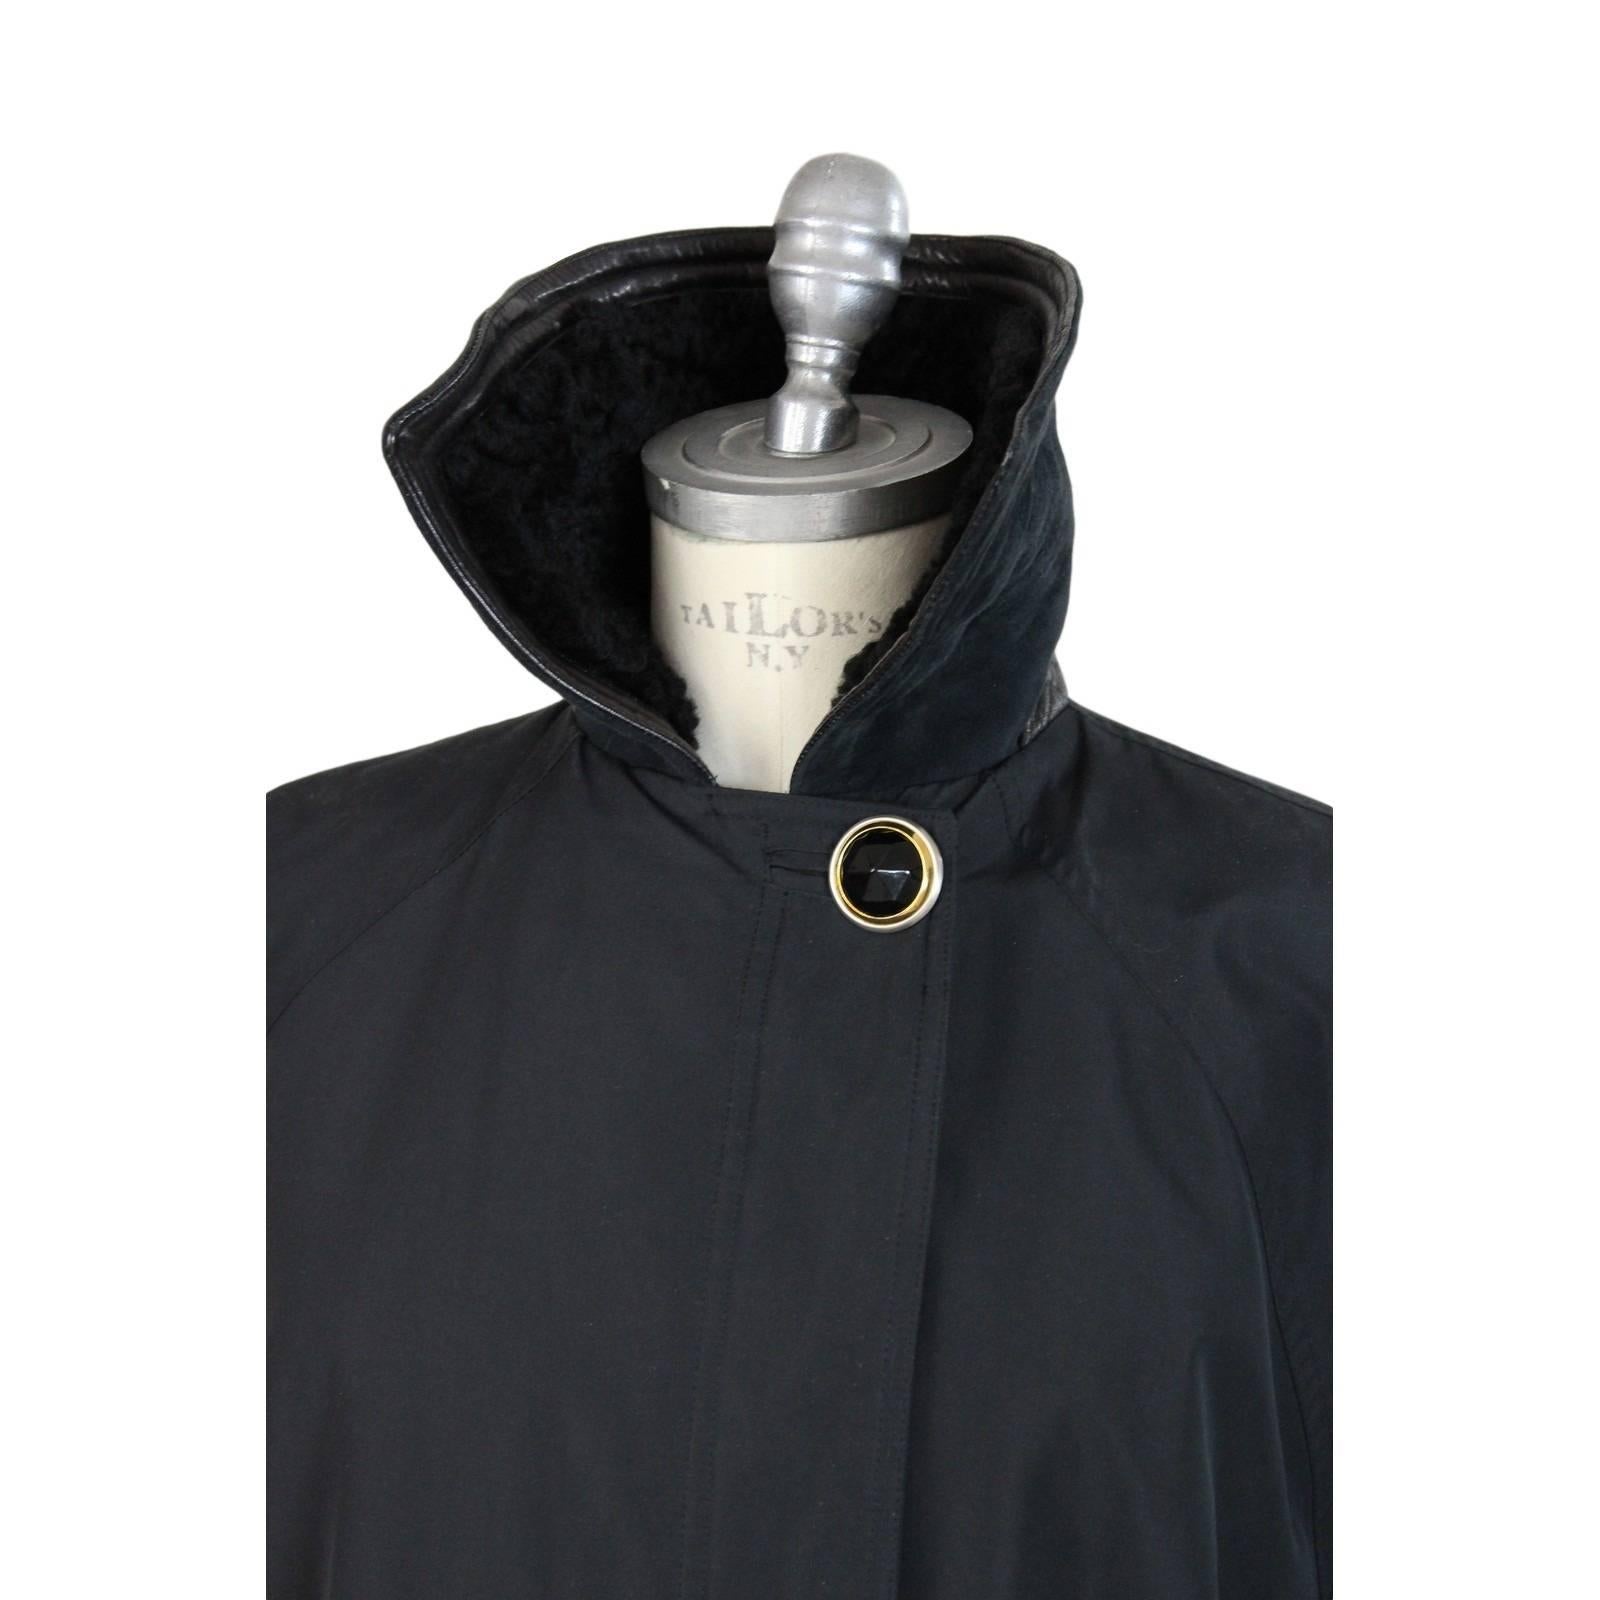 1980s Gianni Versave Black Raincoat Waterproof Shearling & Leather Neck In Excellent Condition For Sale In Brindisi, IT